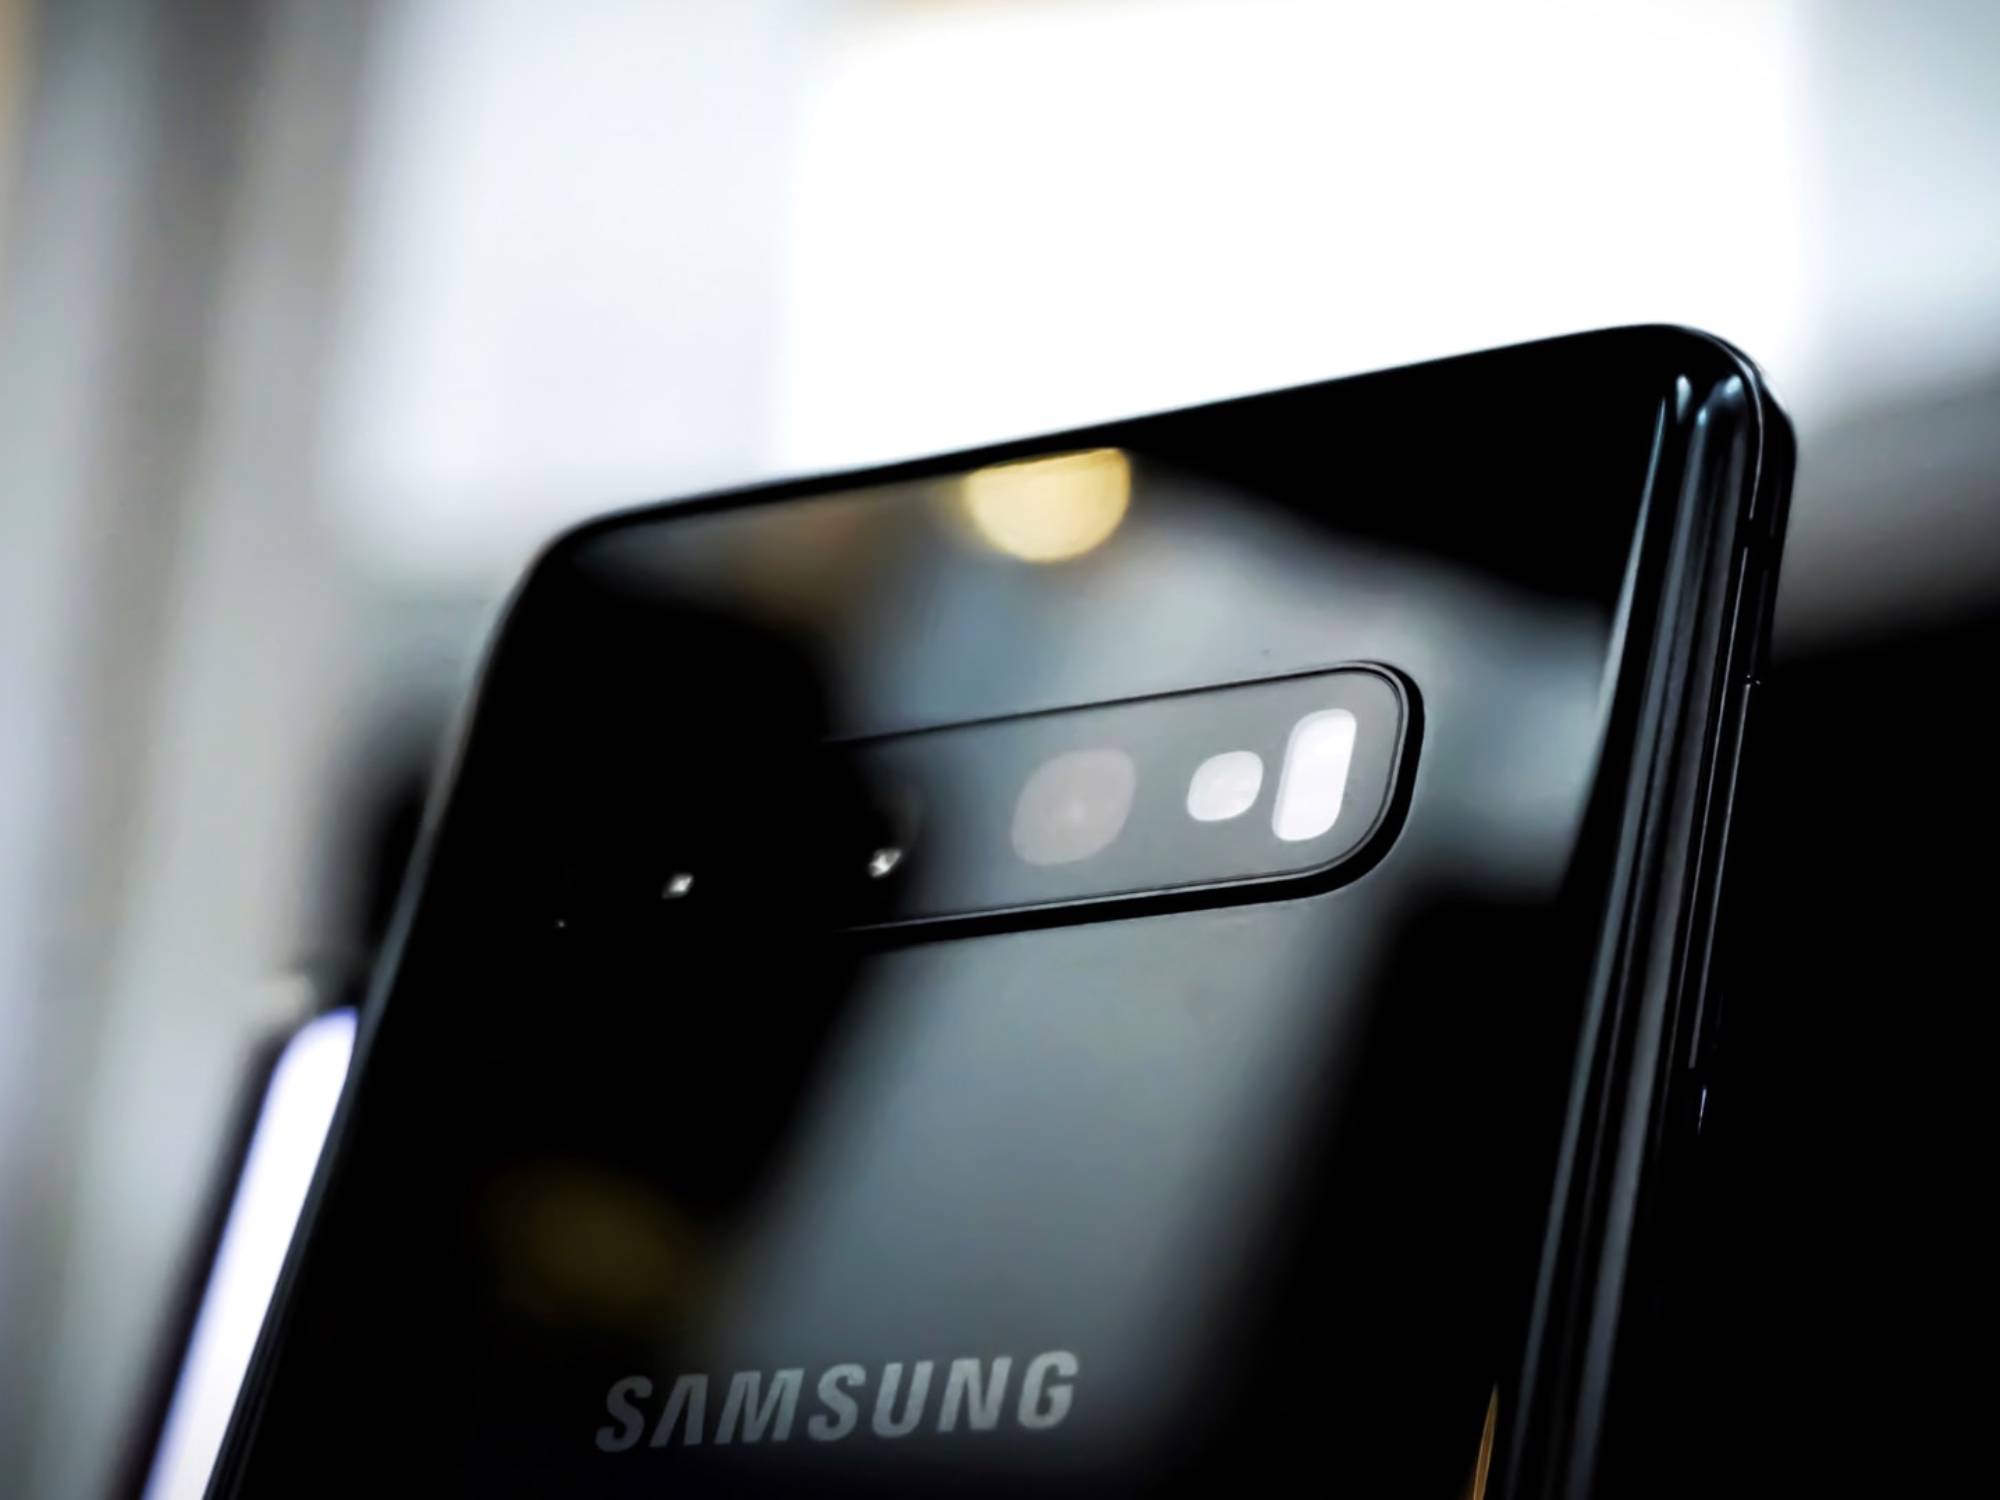 Dominate your phone with these Samsung Galaxy S10 and tricks